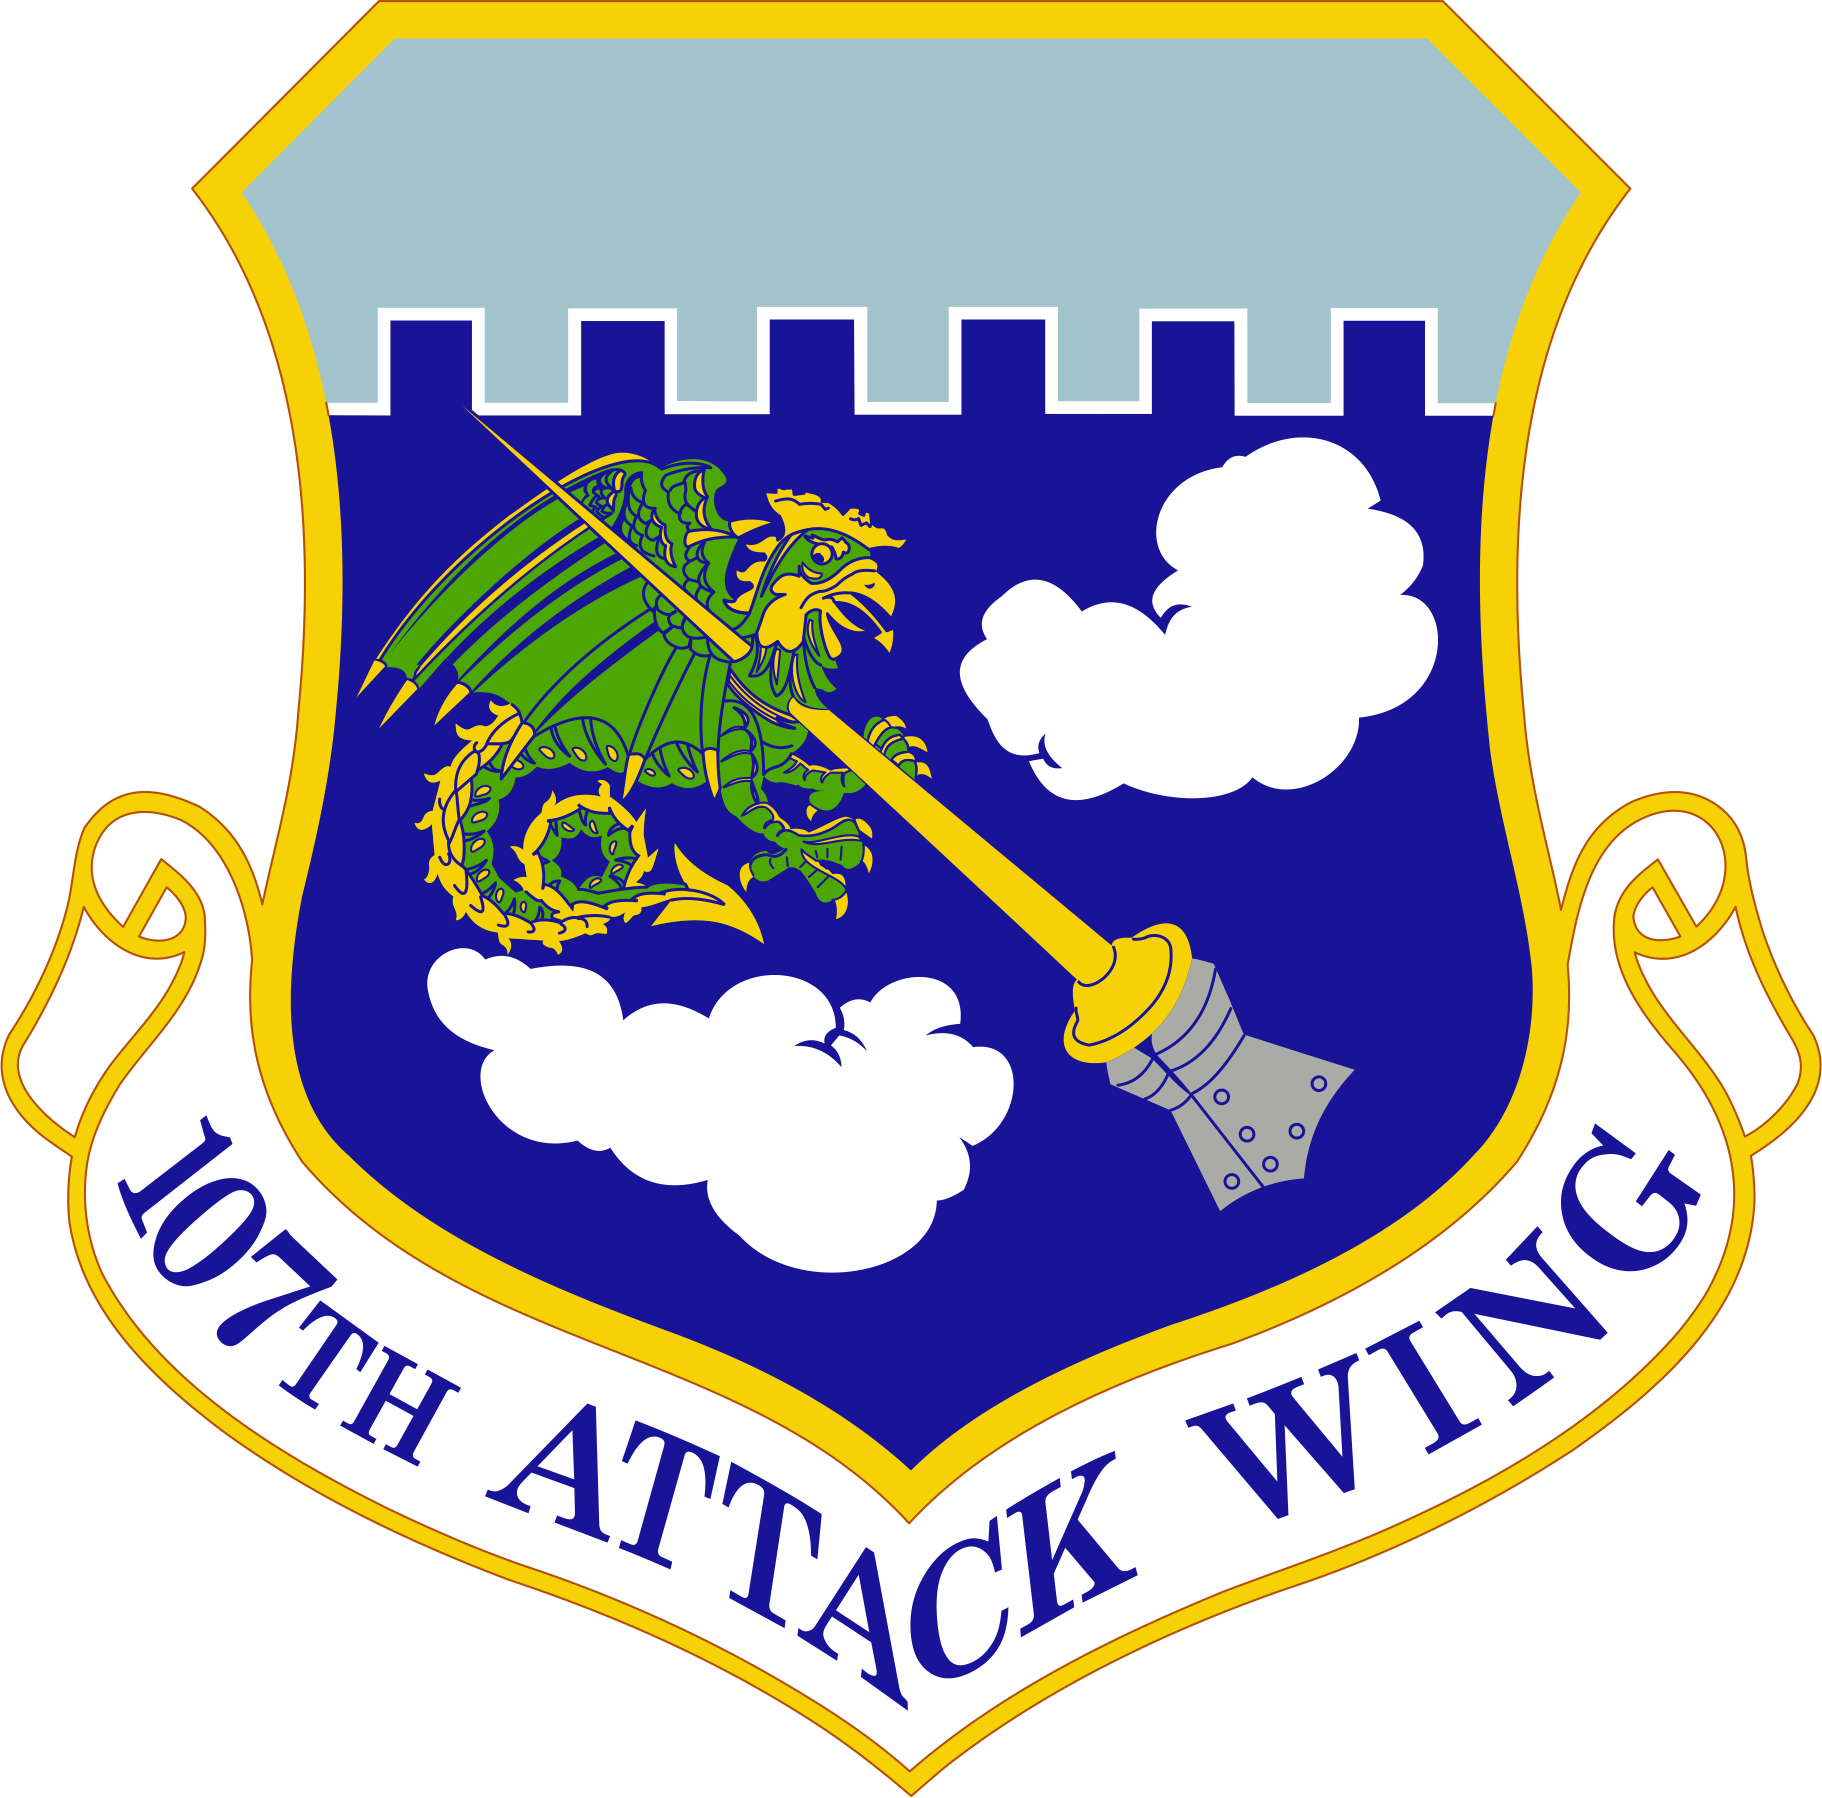 107th Attack Wing